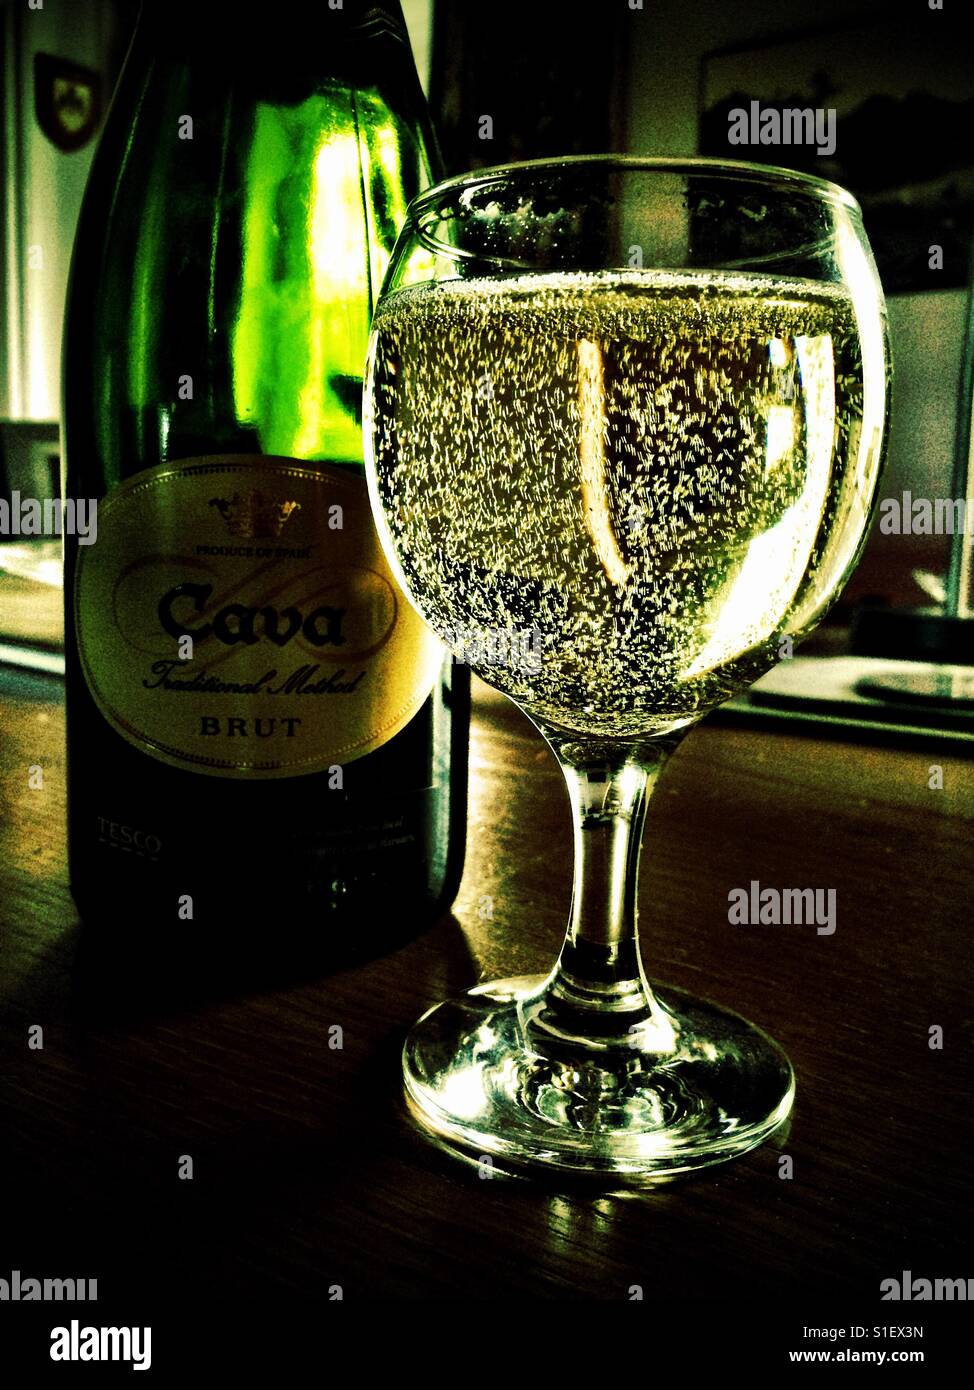 Bottle and glass of sparkling Cava Spanish wine Stock Photo